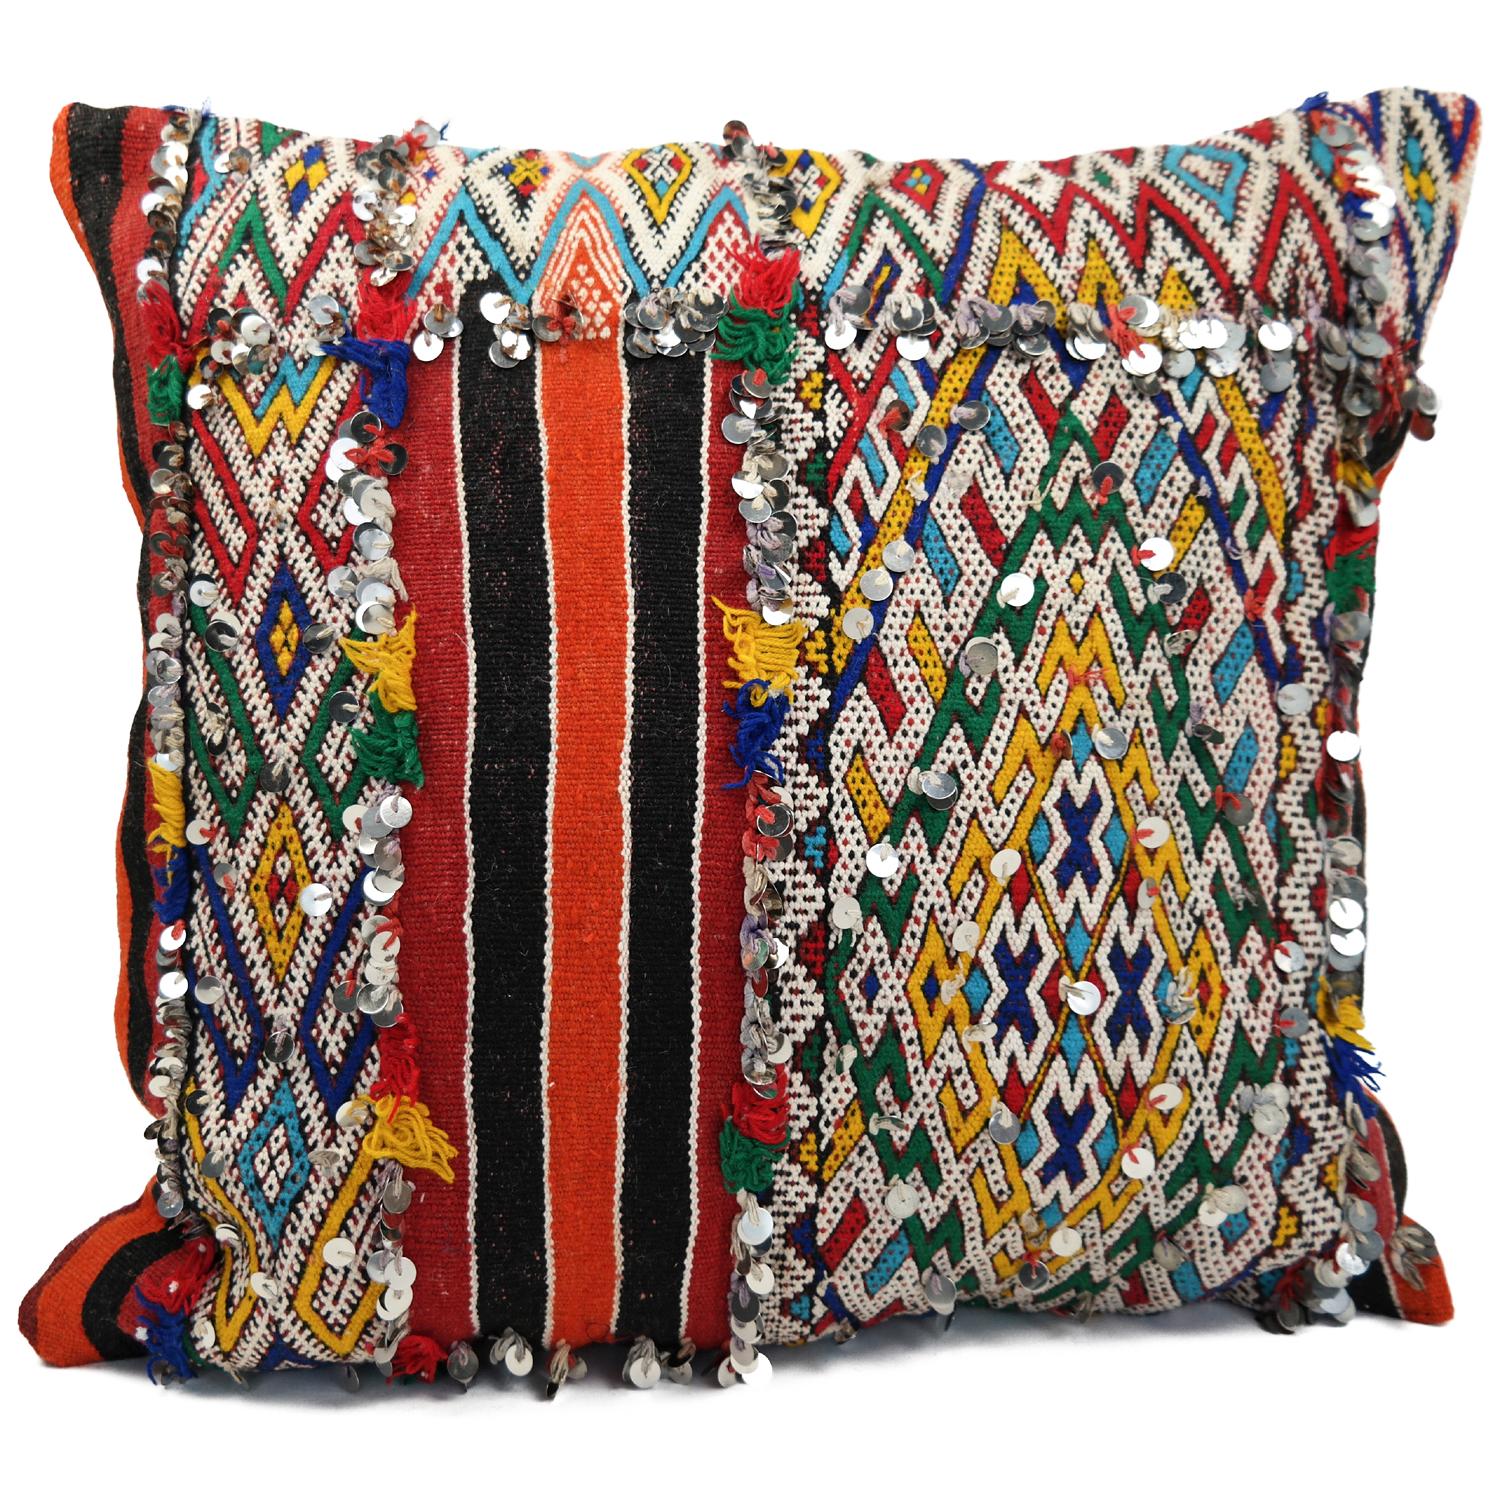 A stunning Bohemian Moroccan Kilim cushion custom made in Morocco. Cut from a circa 40 years old hand loomed Kilim rug, from the Middle Atlas mountains. We have searched and selected the rug ourselves. The pillow has beautiful colors like red,